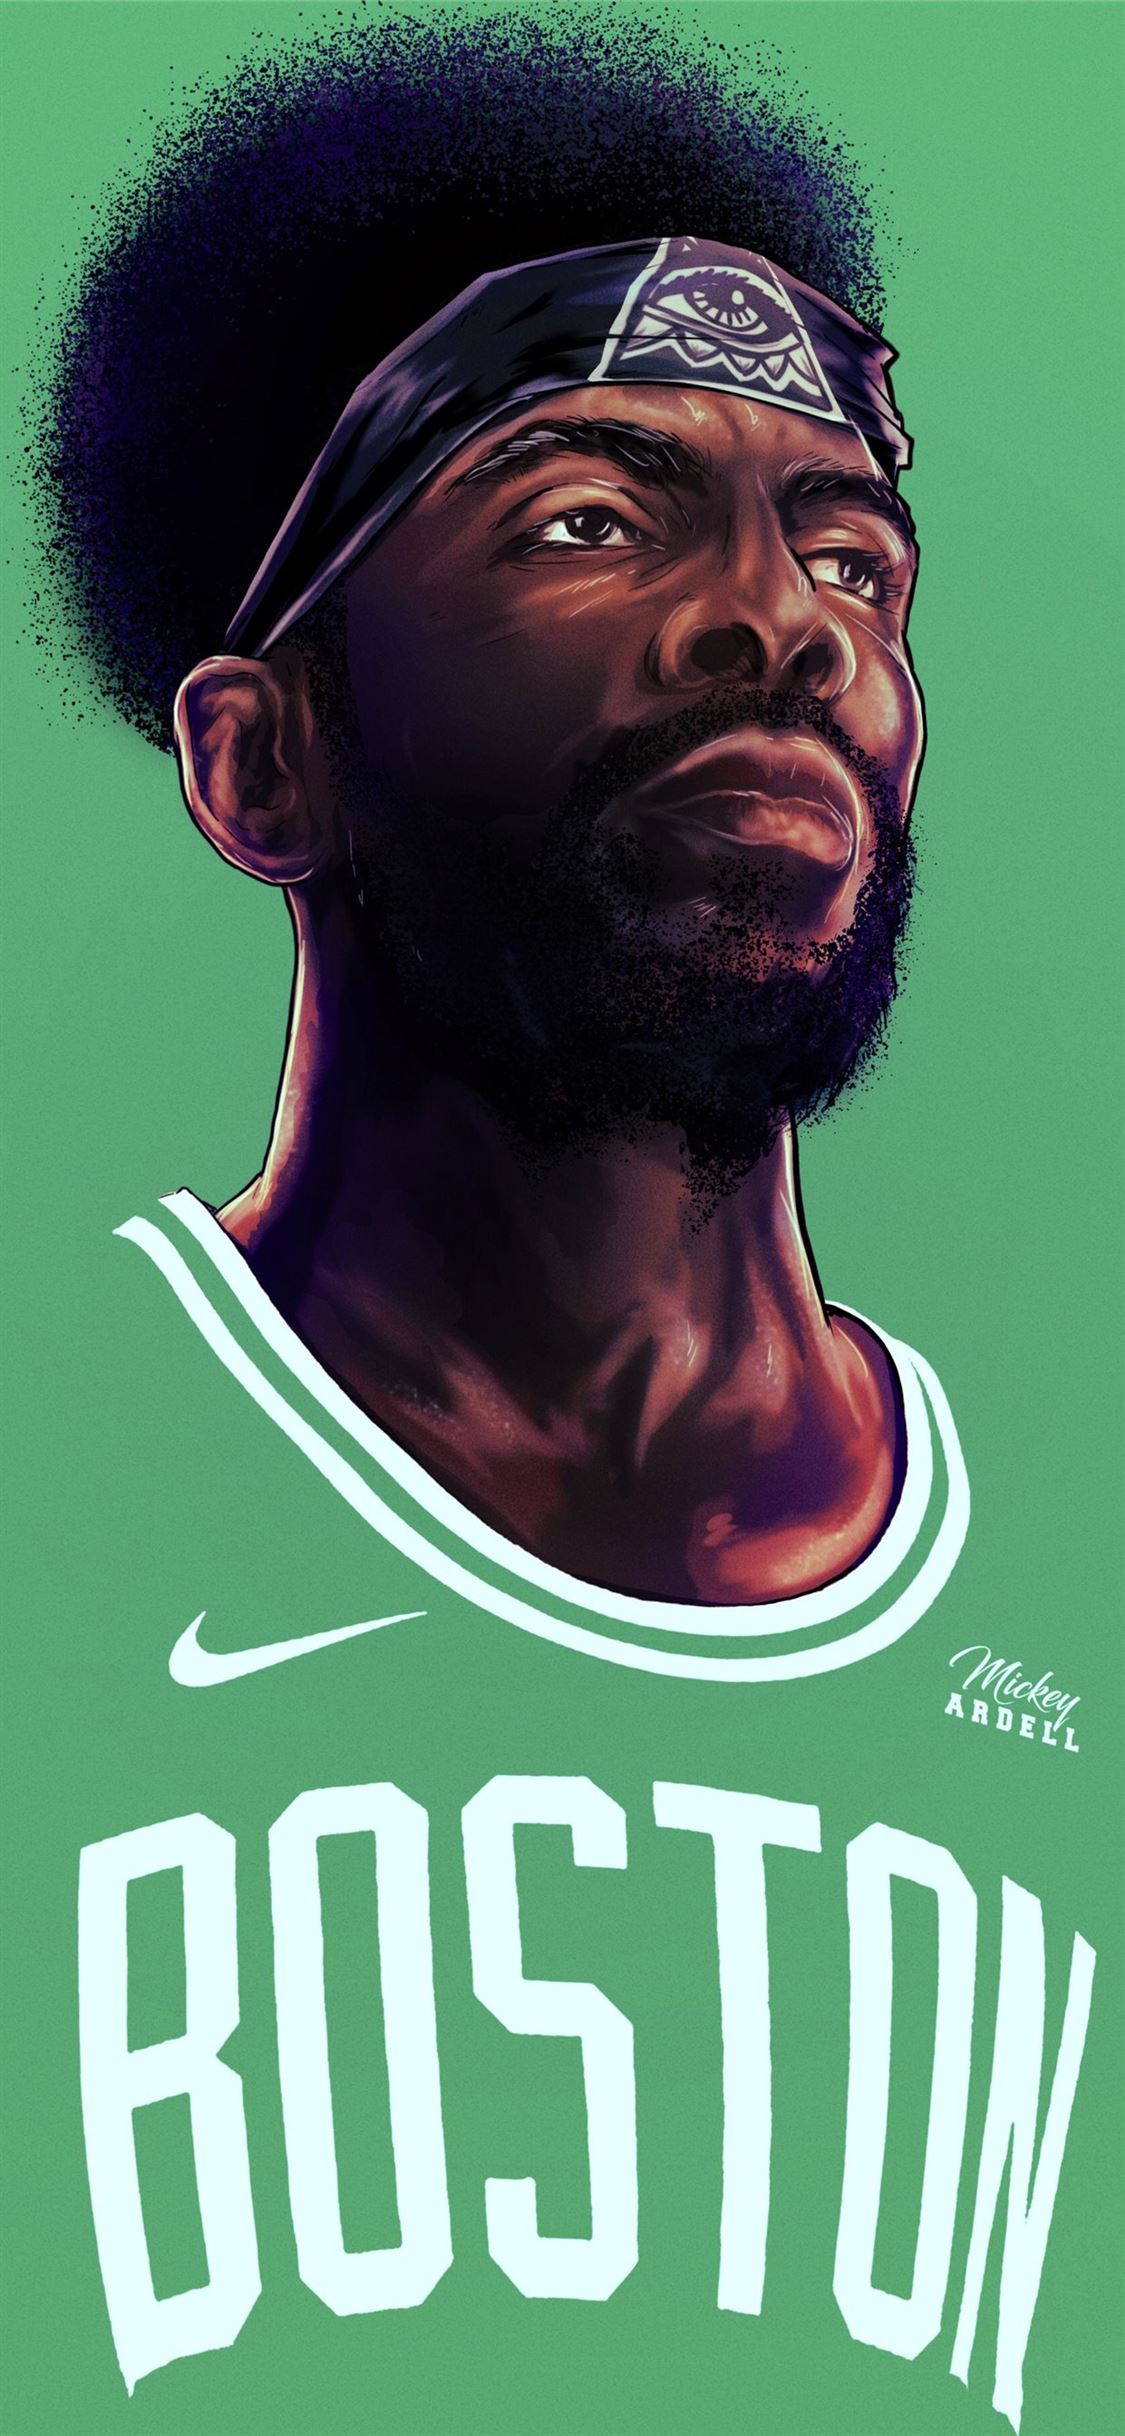 Idea by Tobgyal on Nba iPhone X Wallpapers Free Download